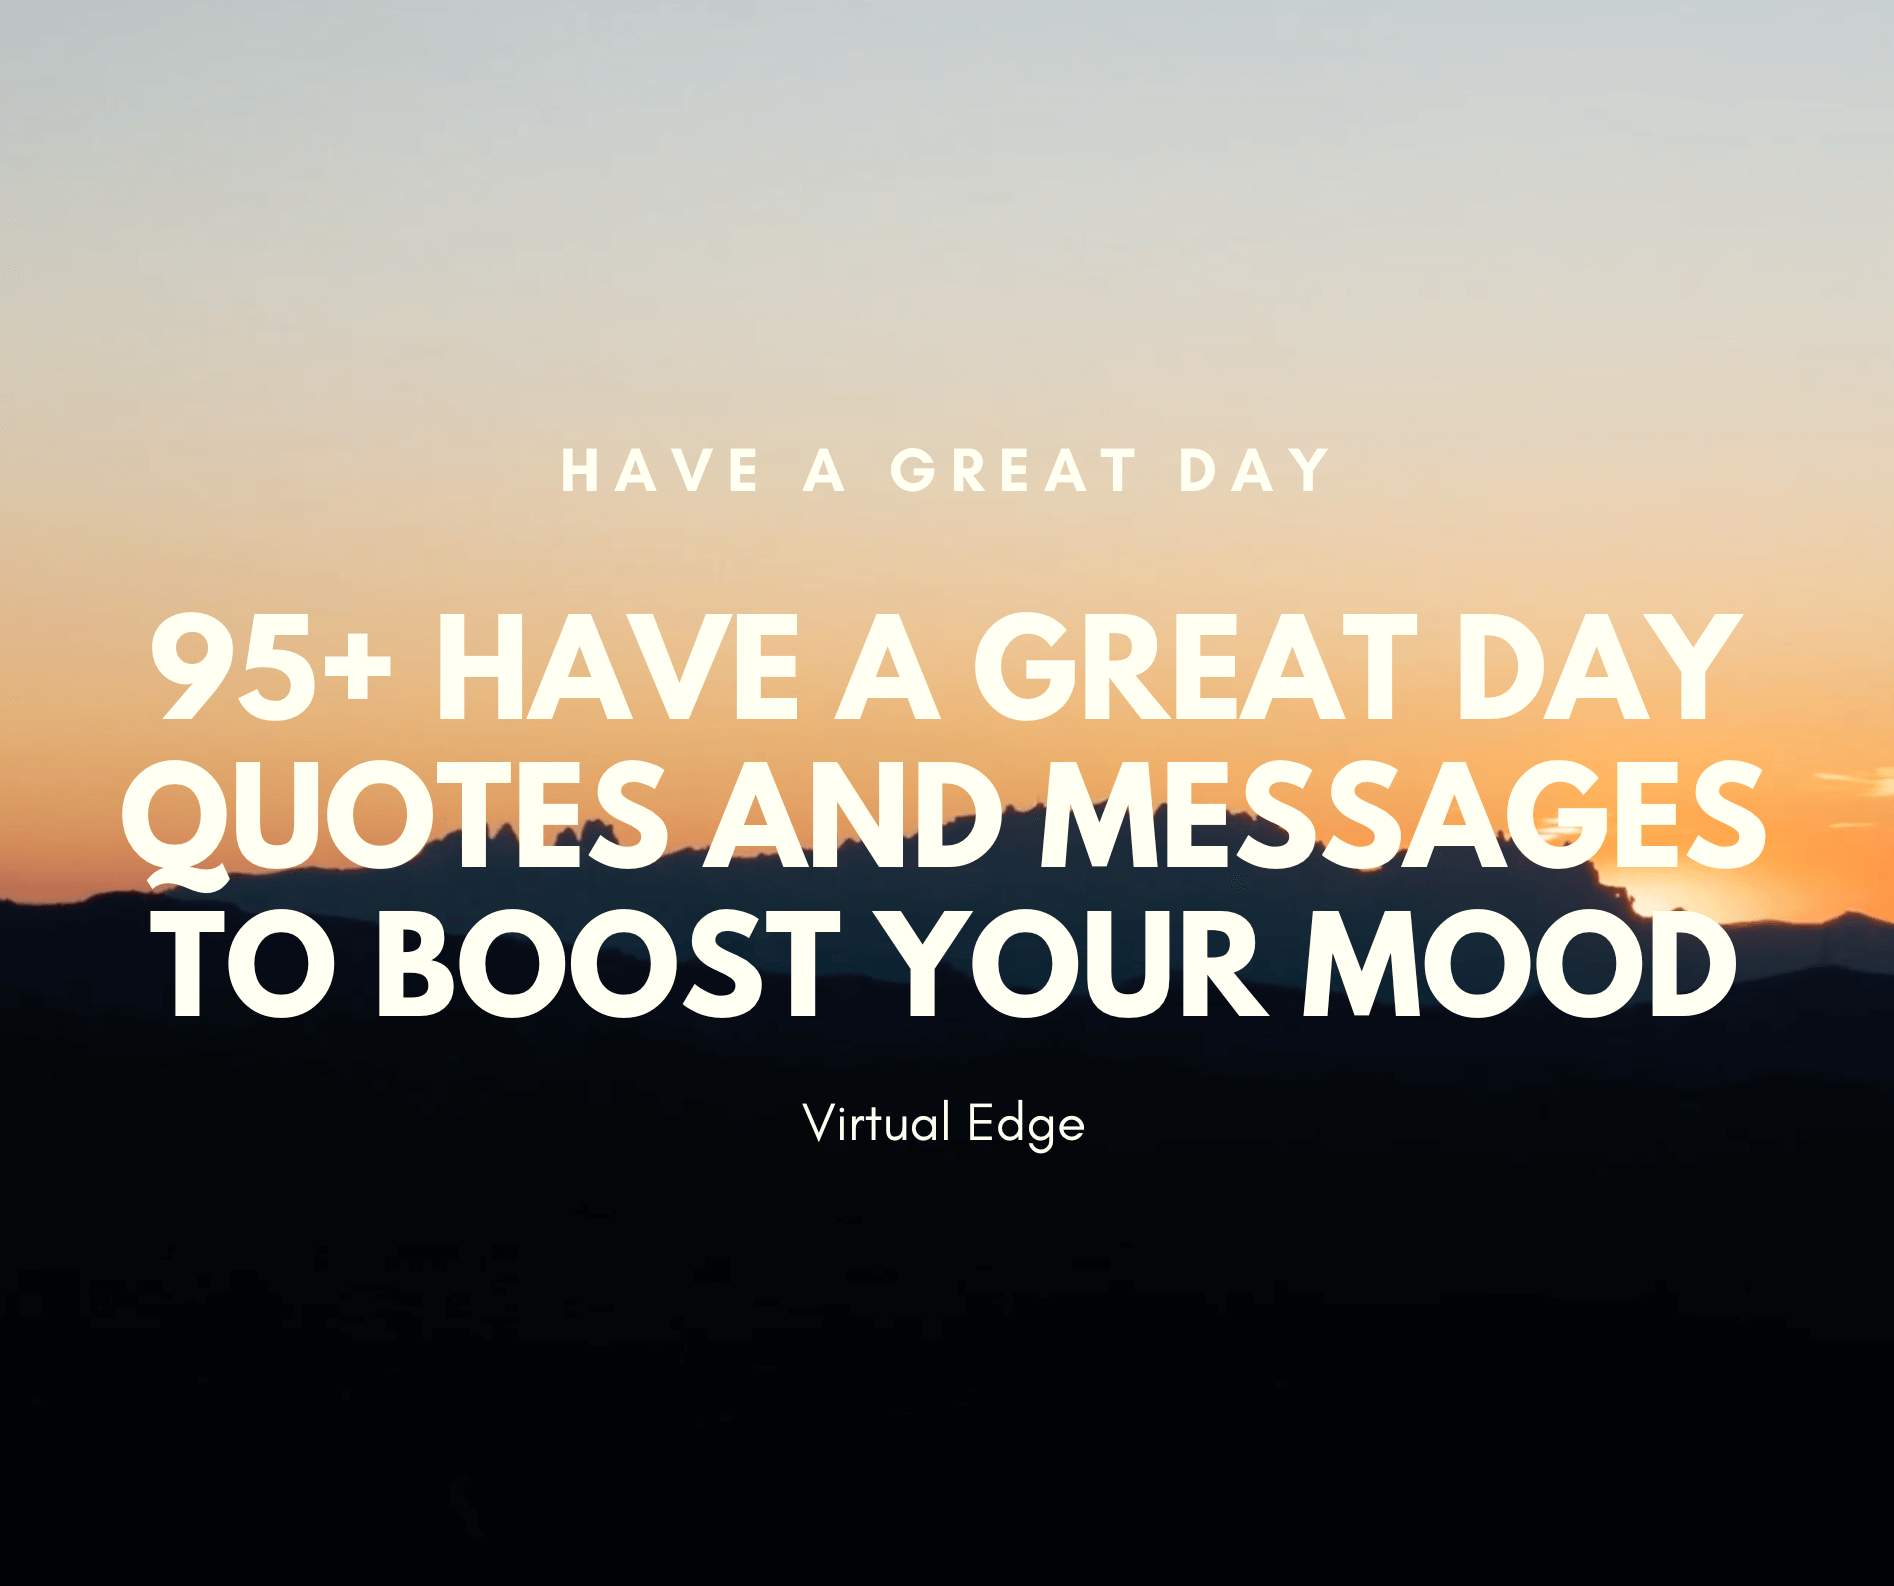 What a good day quotes